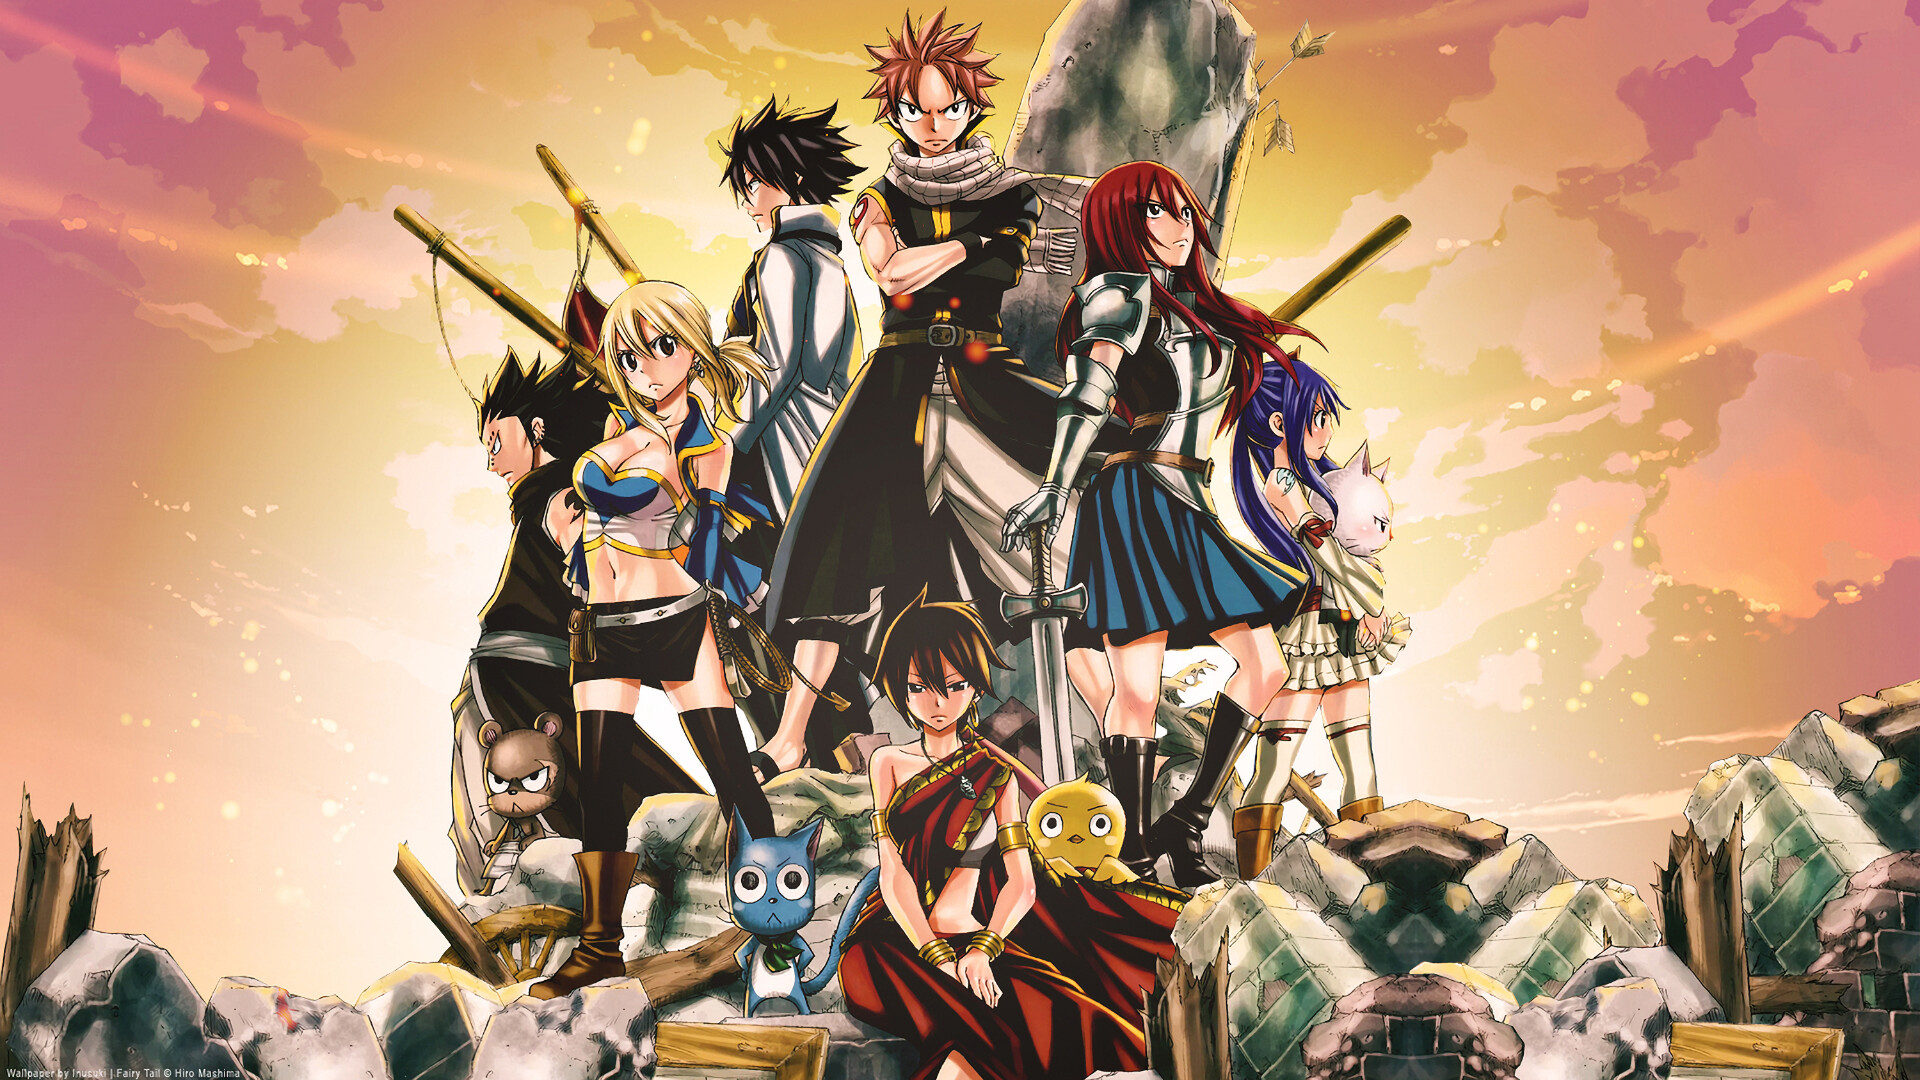 Fairy Tail: The series won the "Meilleur Anime Japonais" award at the 19th Anime and Manga Grand Prix in Paris. 1920x1080 Full HD Background.